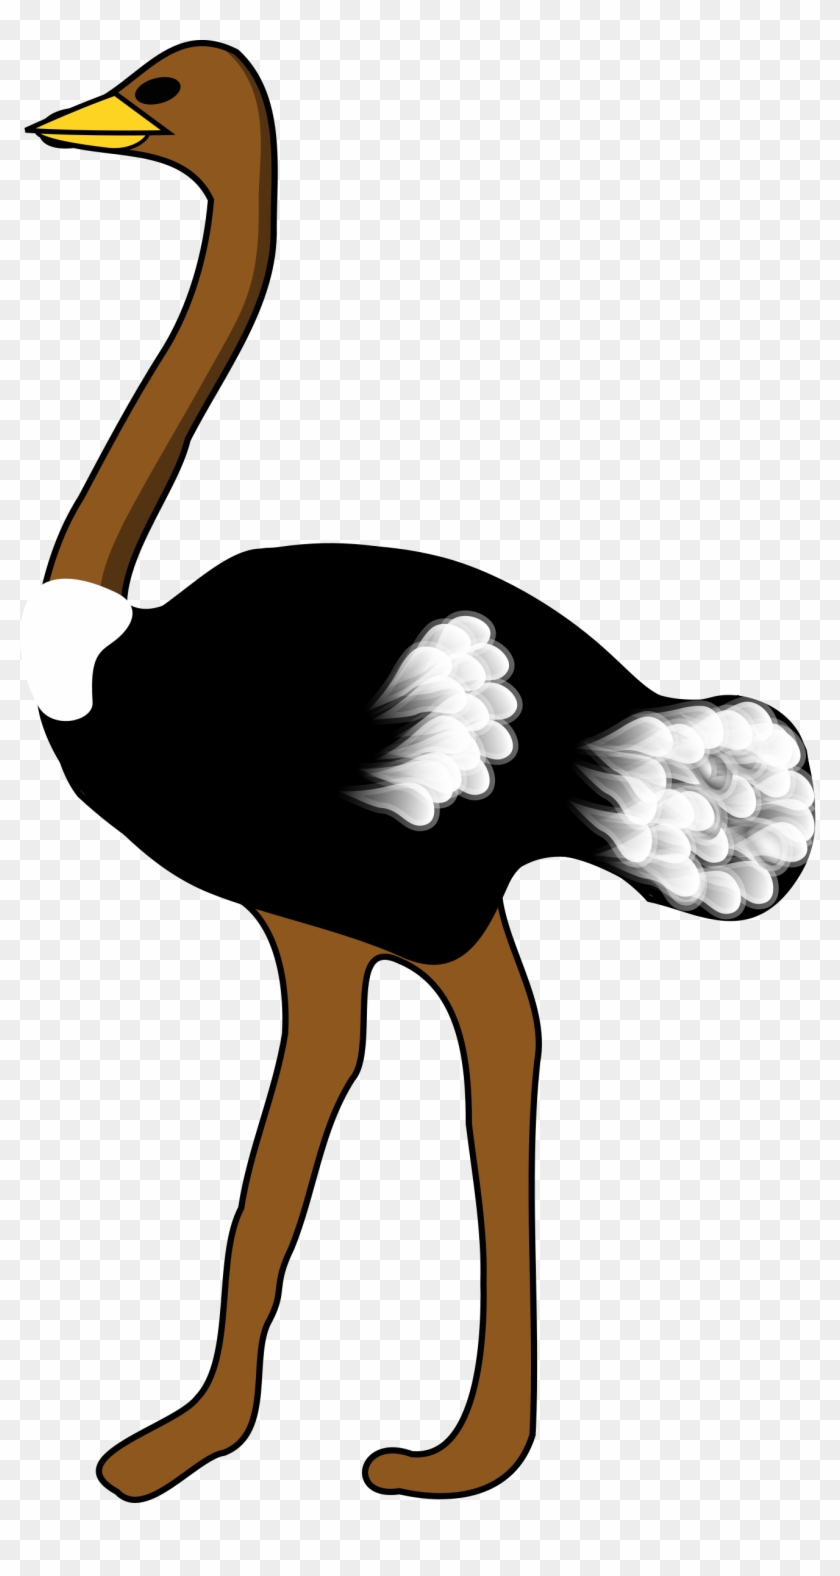 Image Of An Ostrich Inspired By Heraldry - Ostrich Clipart #38401